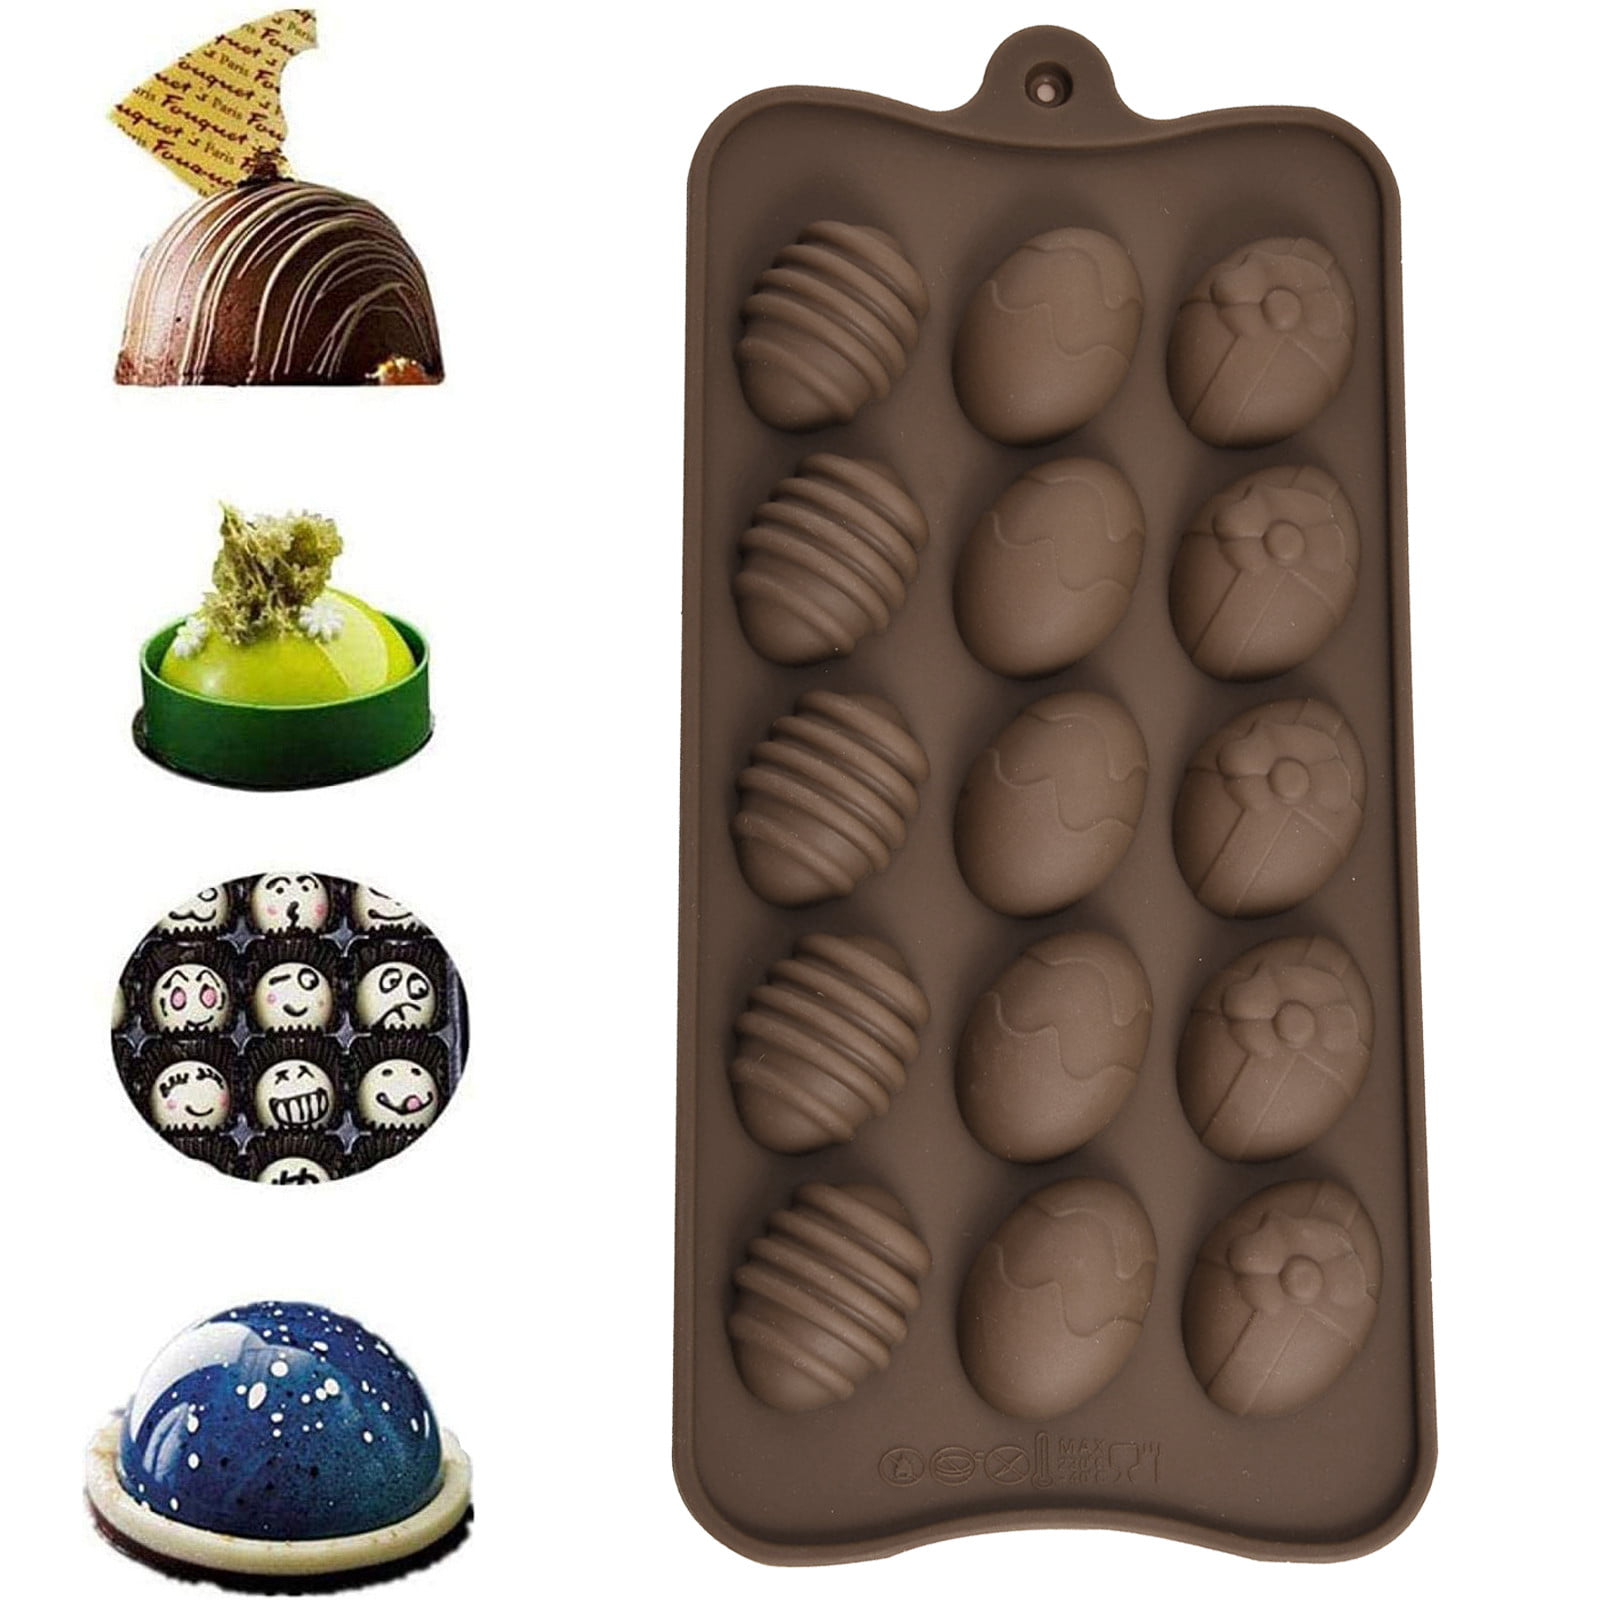 Classical Silicone Chocolate Decorating Mould Candy Cookie Cake Baking Mold Tool